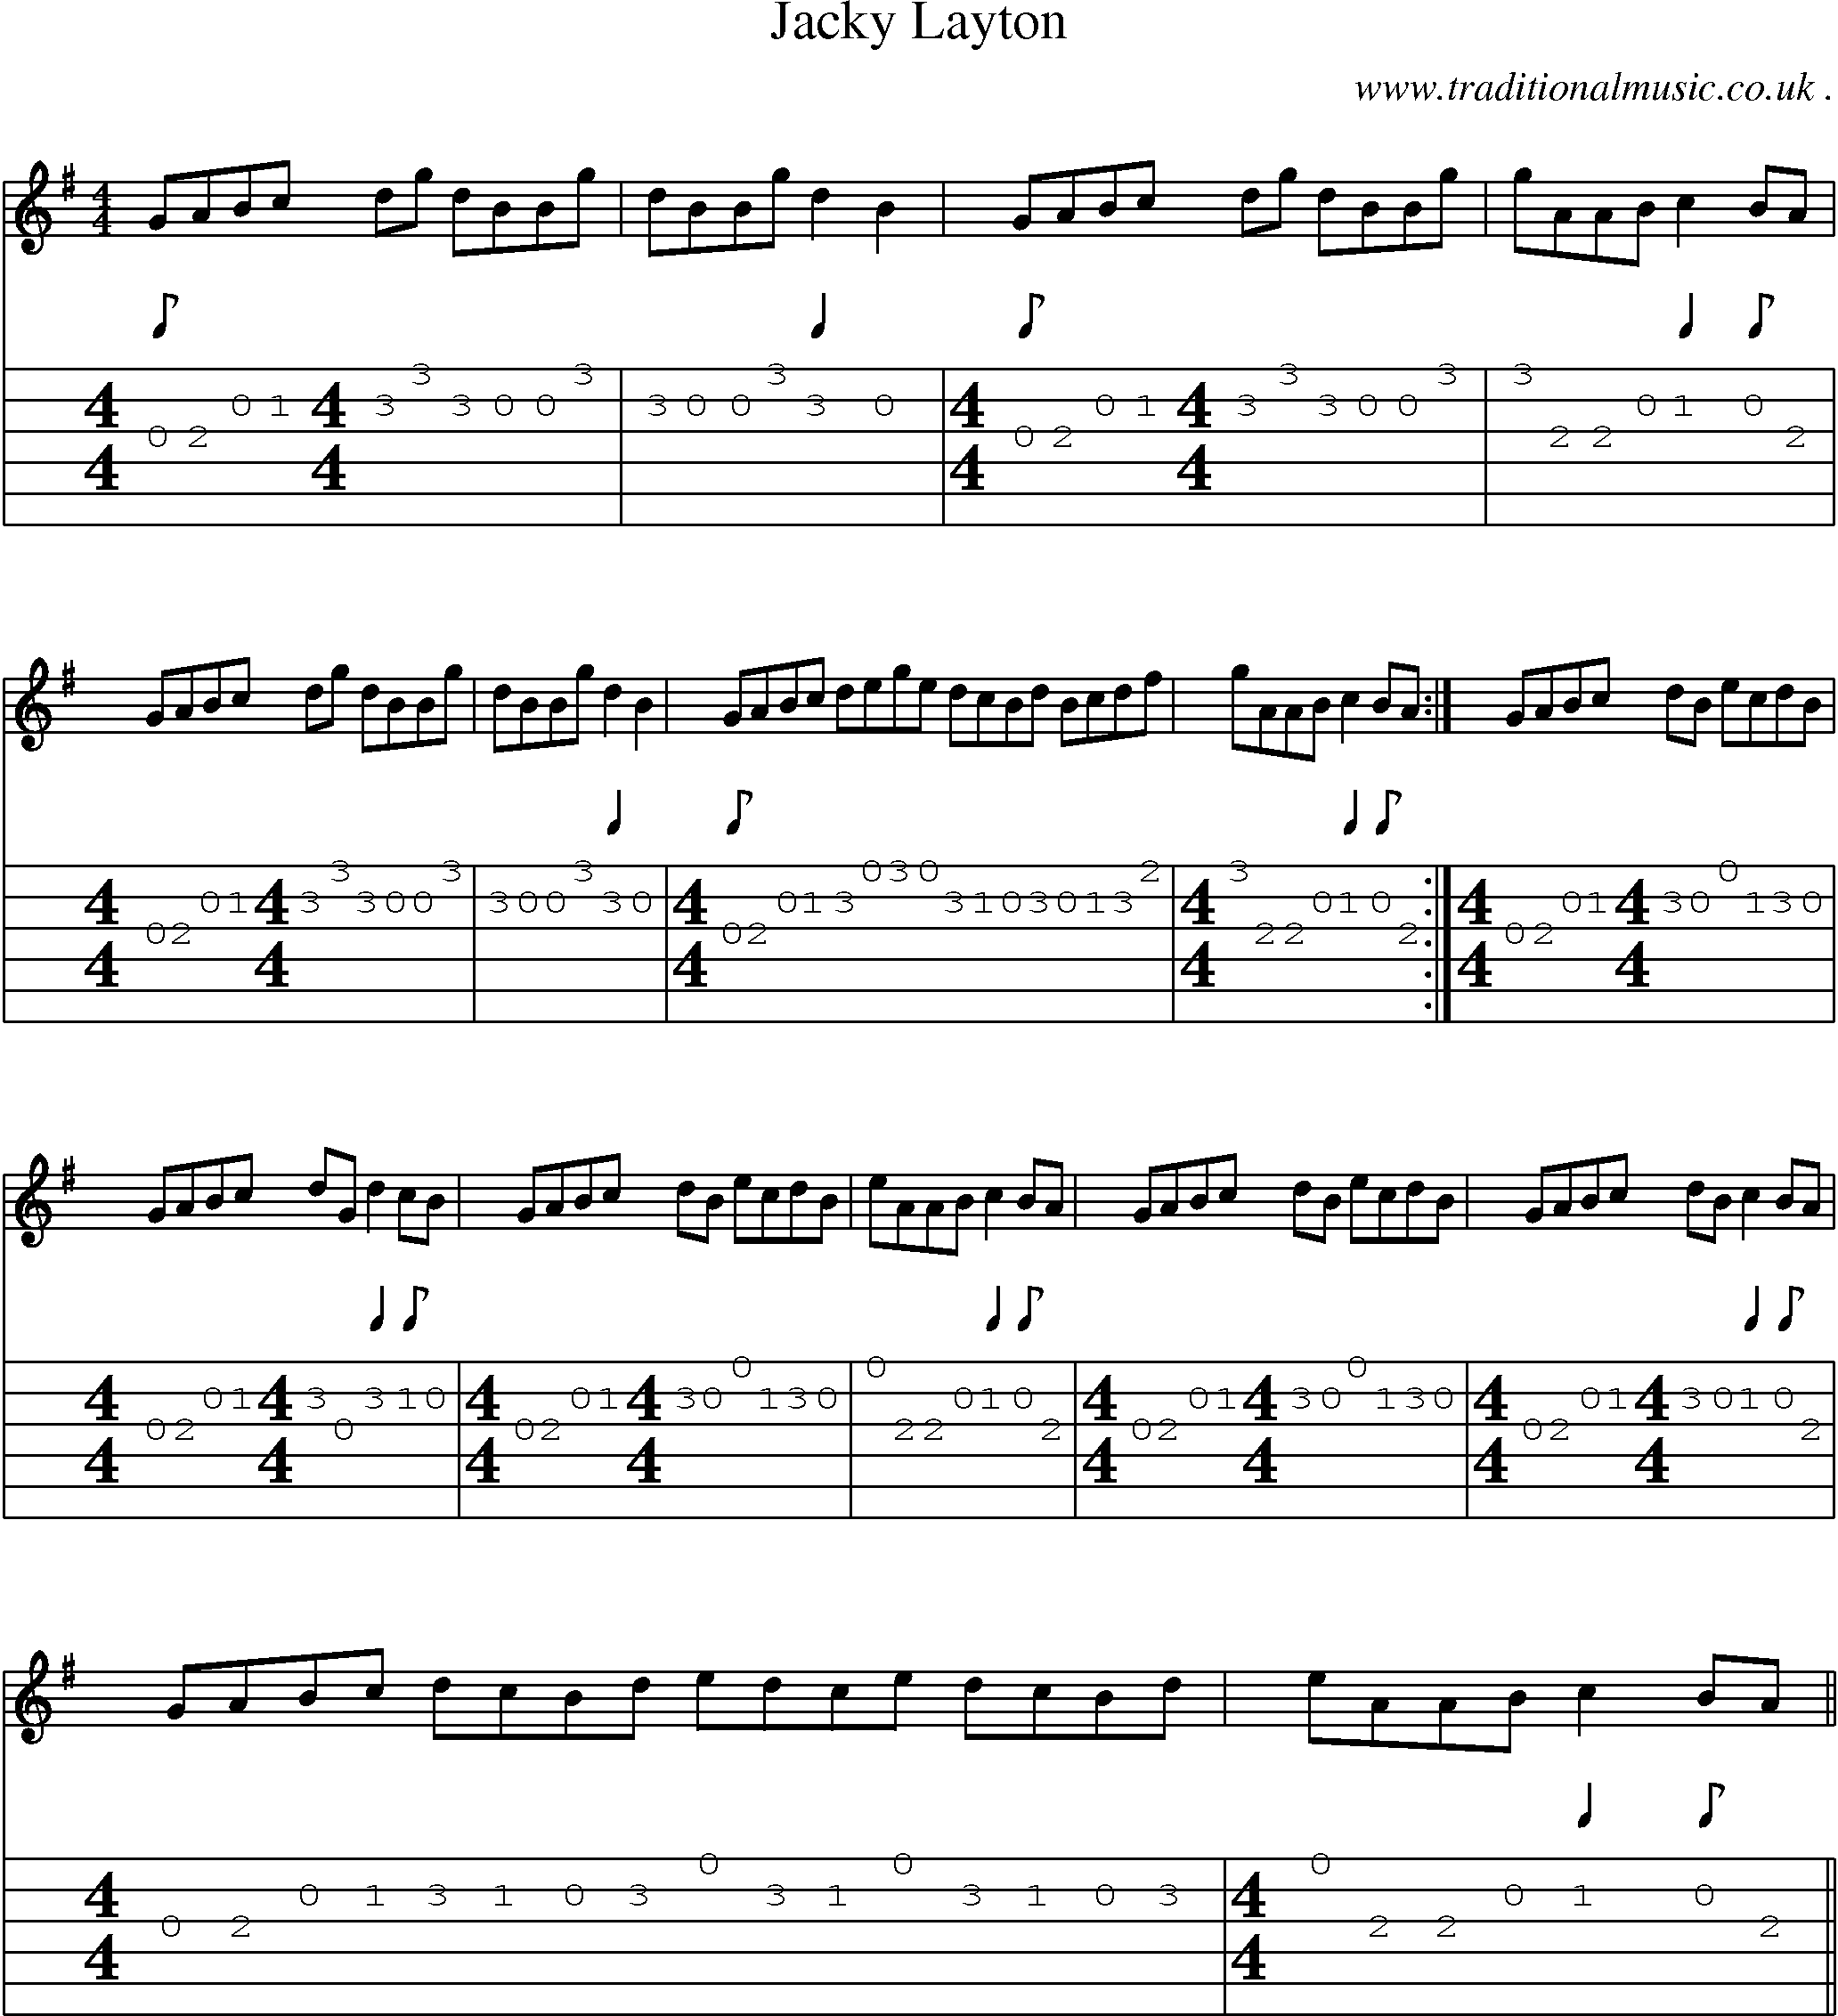 Sheet-Music and Guitar Tabs for Jacky Layton